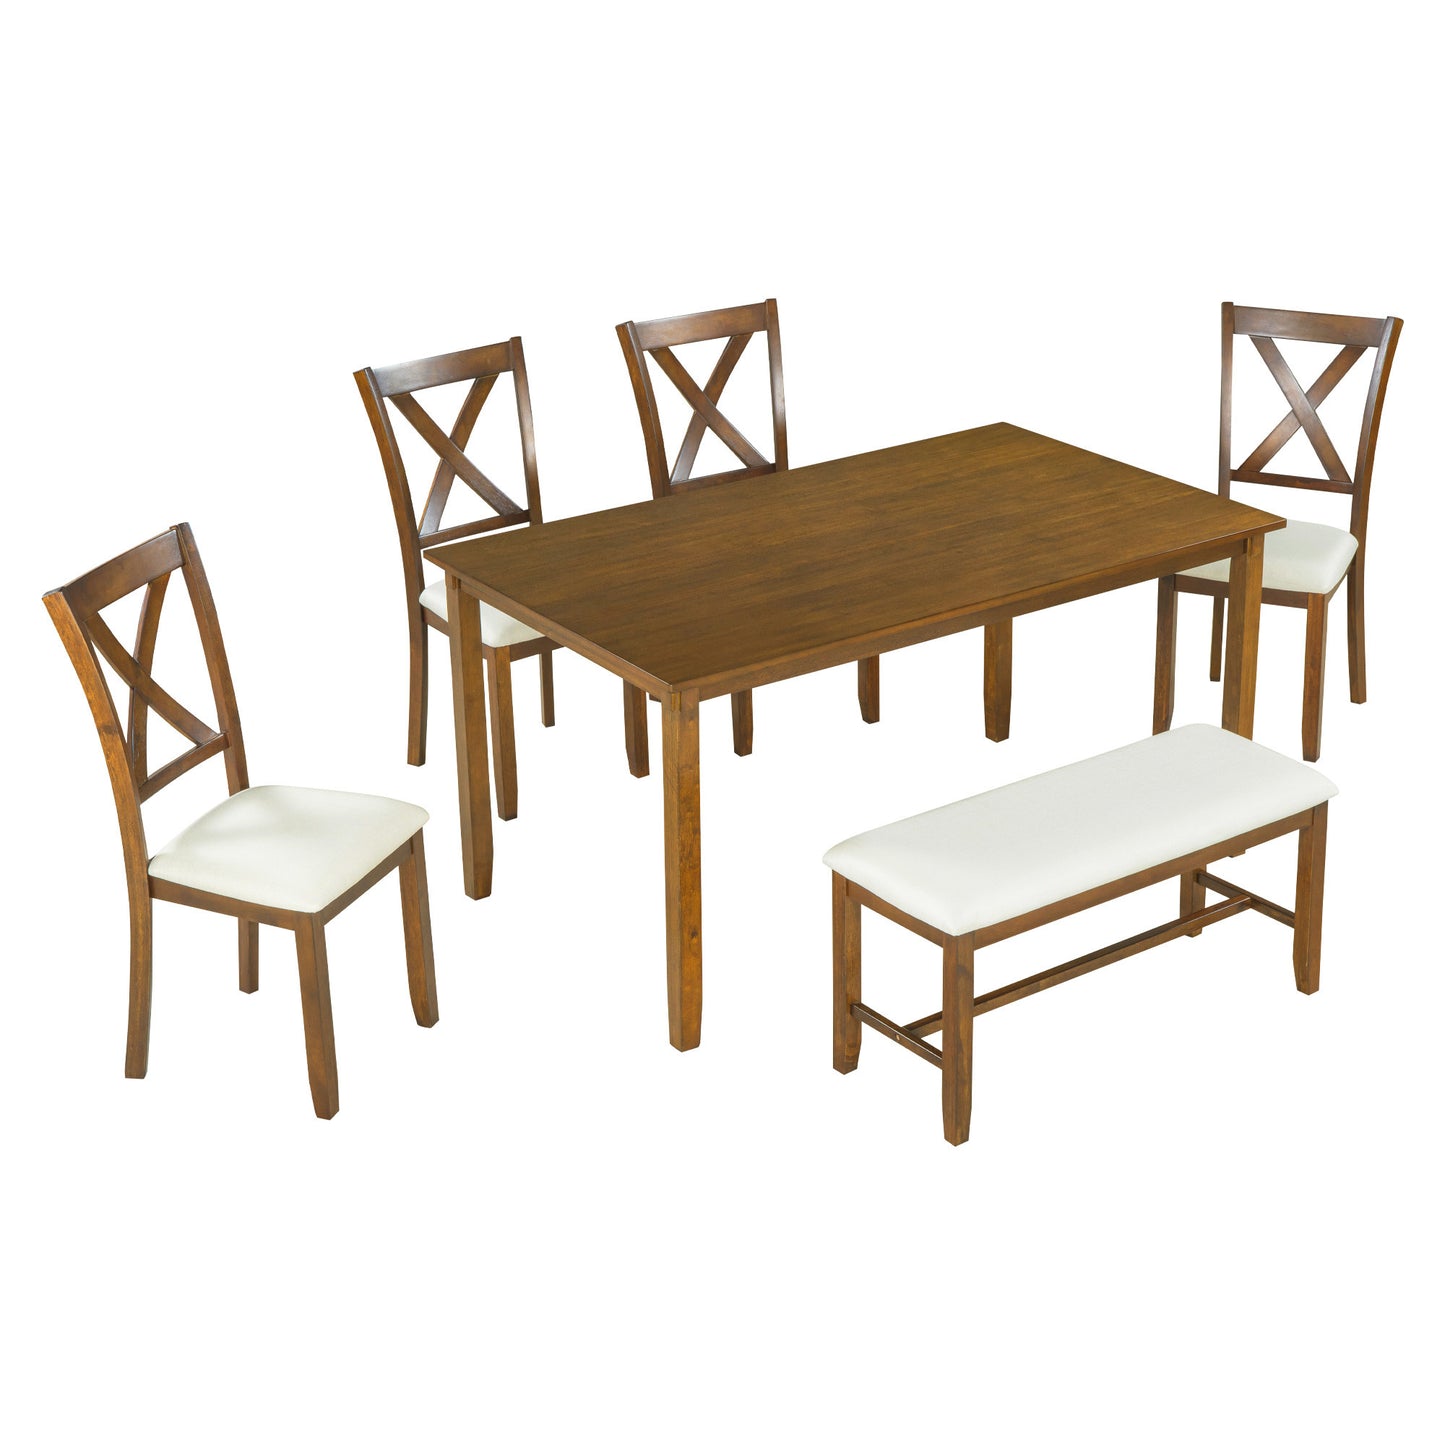 TREXM 6-Piece Kitchen Dining Table Set Natural Cherry